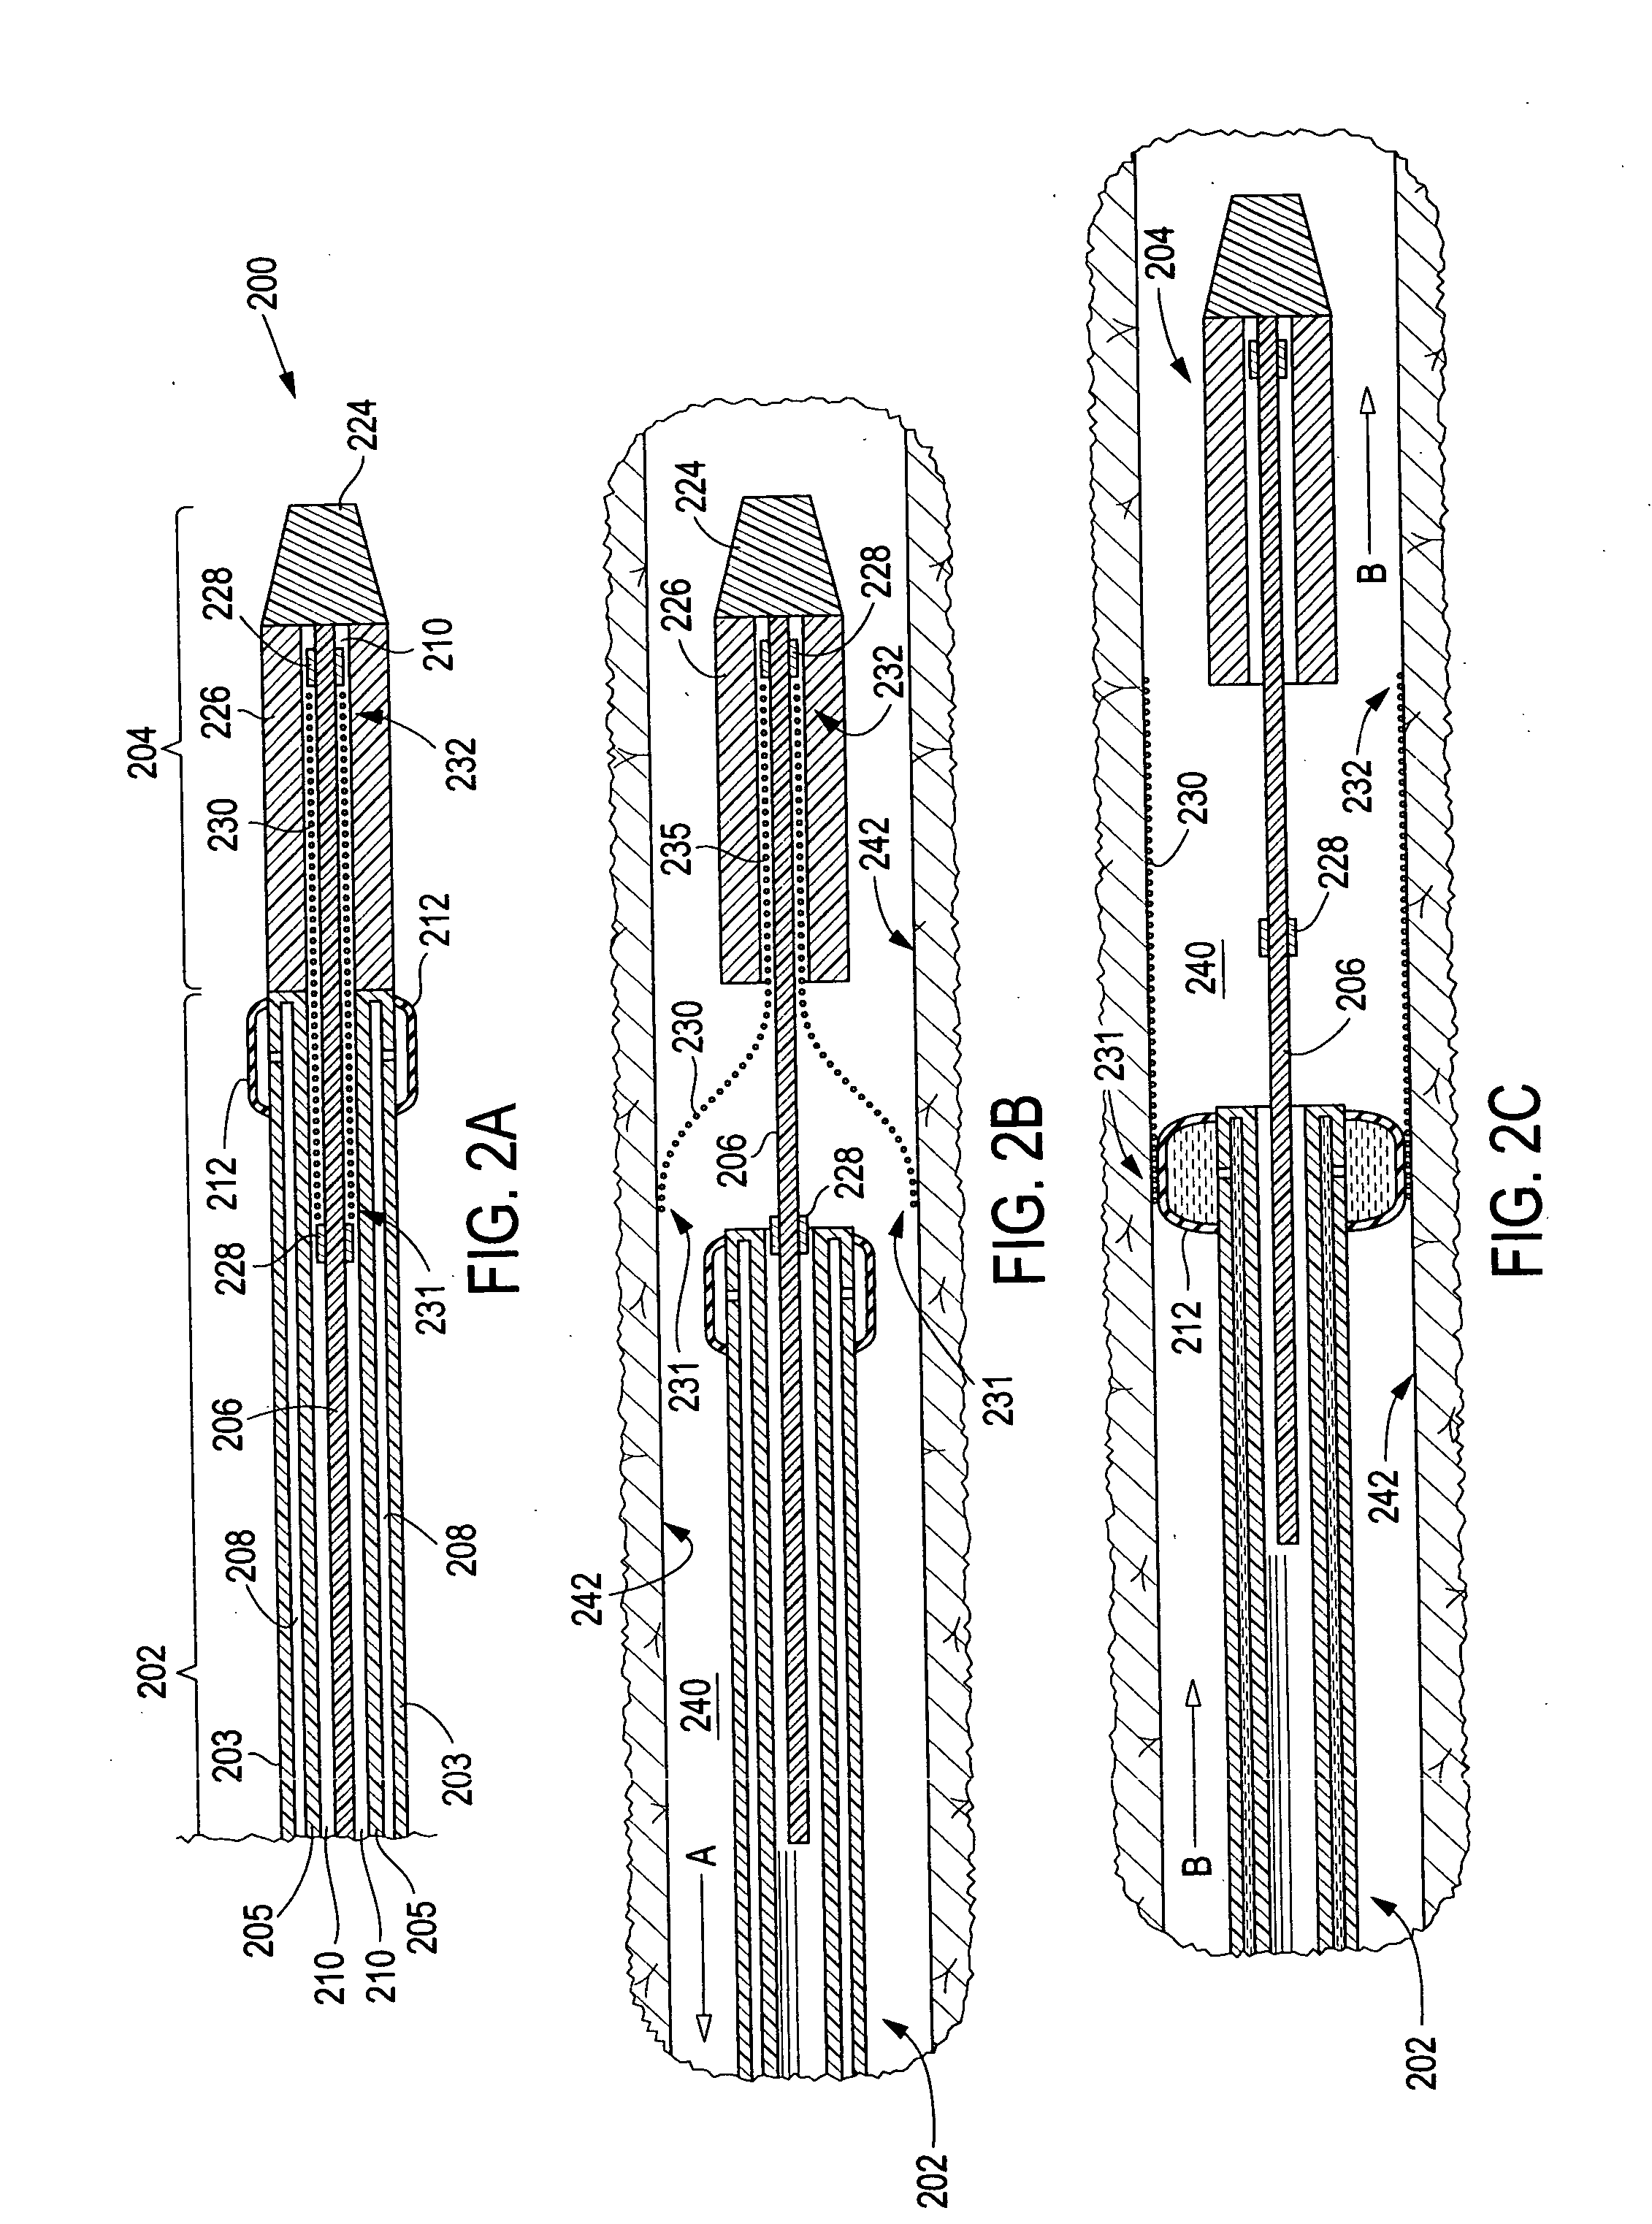 Apparatus and method for deployment of an endoluminal device